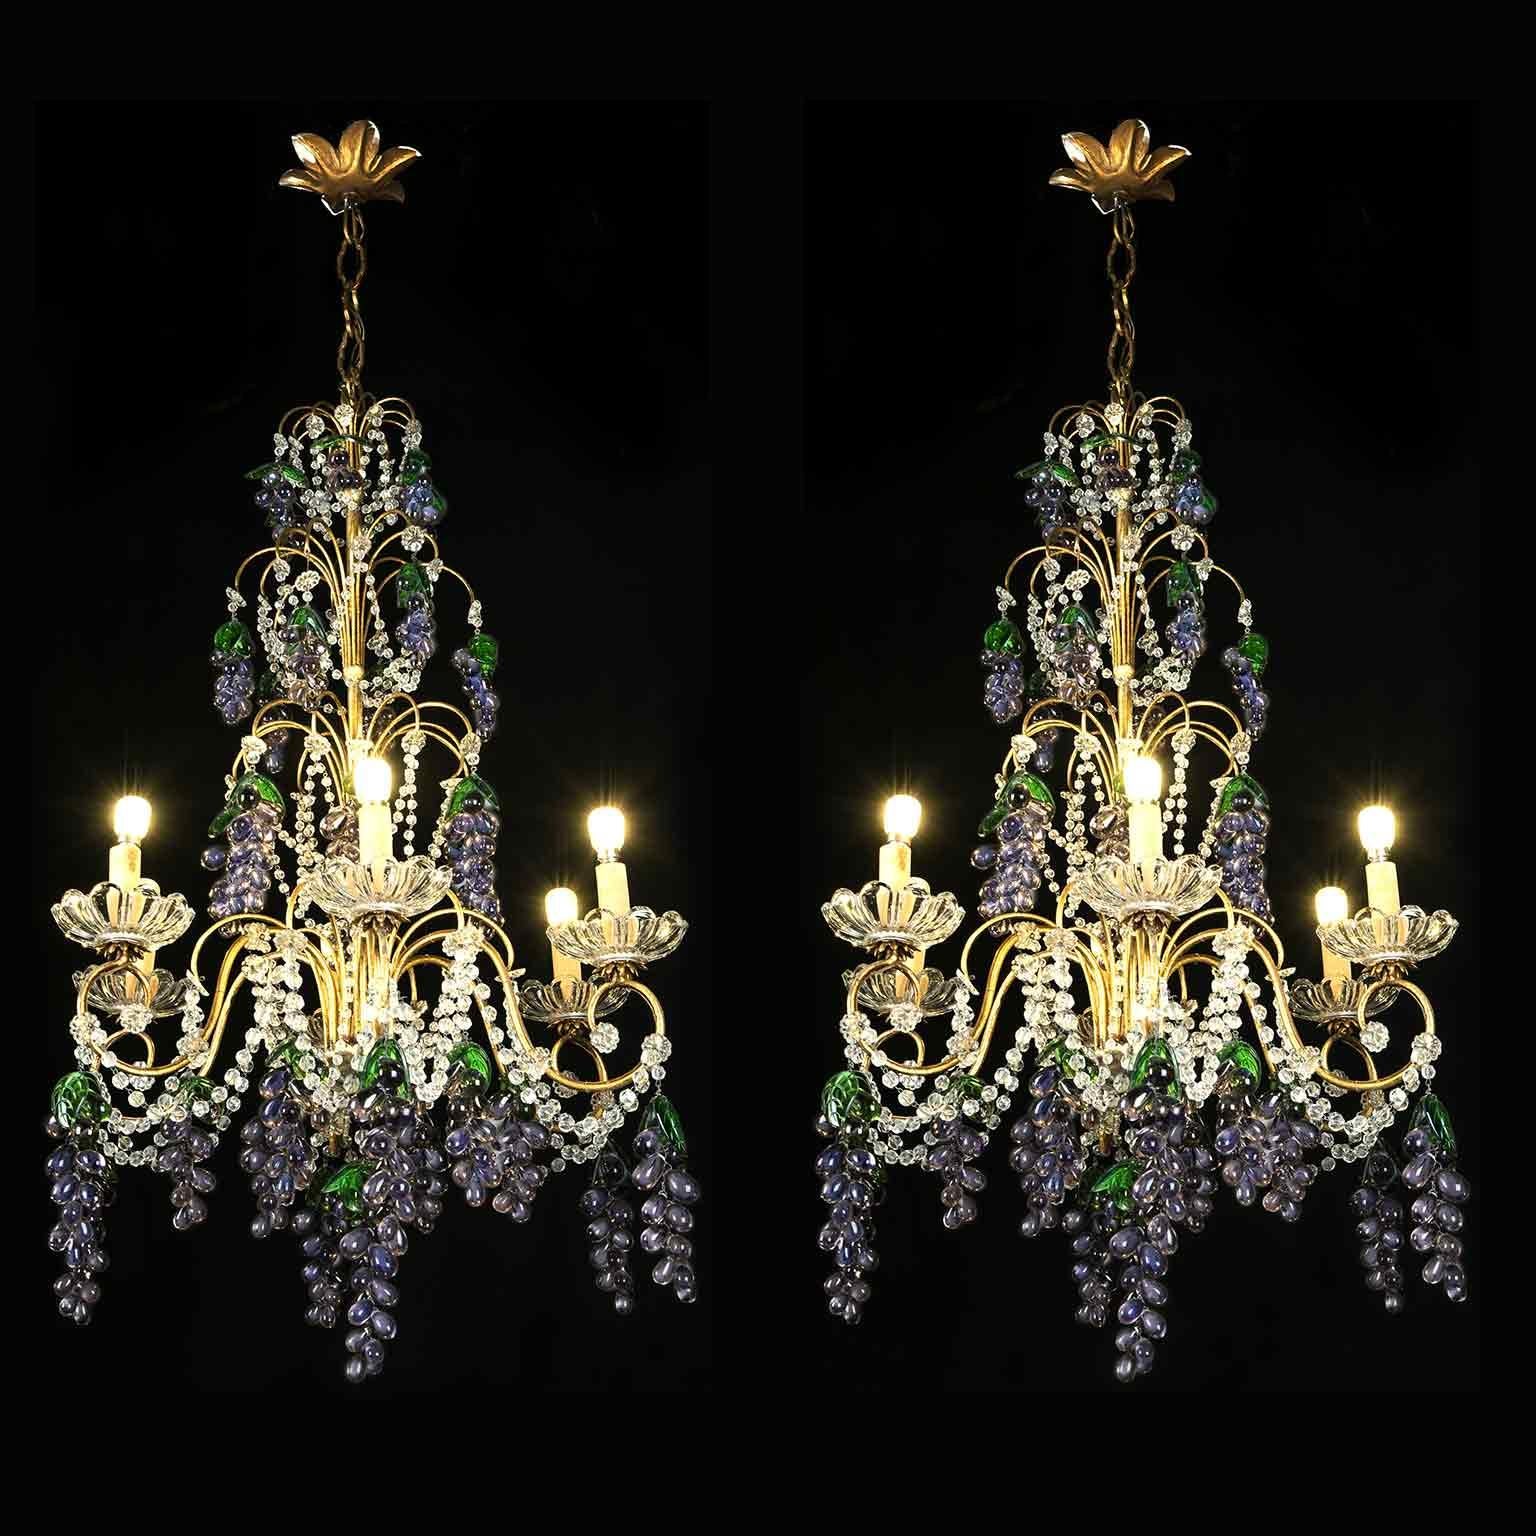 A pair of charming Italian gilt iron and clear crystal six-light chandeliers adorned with purple amethyst colored glass pendants from Murano, embellished with a multitude of fruit grapes pendants in colored glass. Each branch has one light and